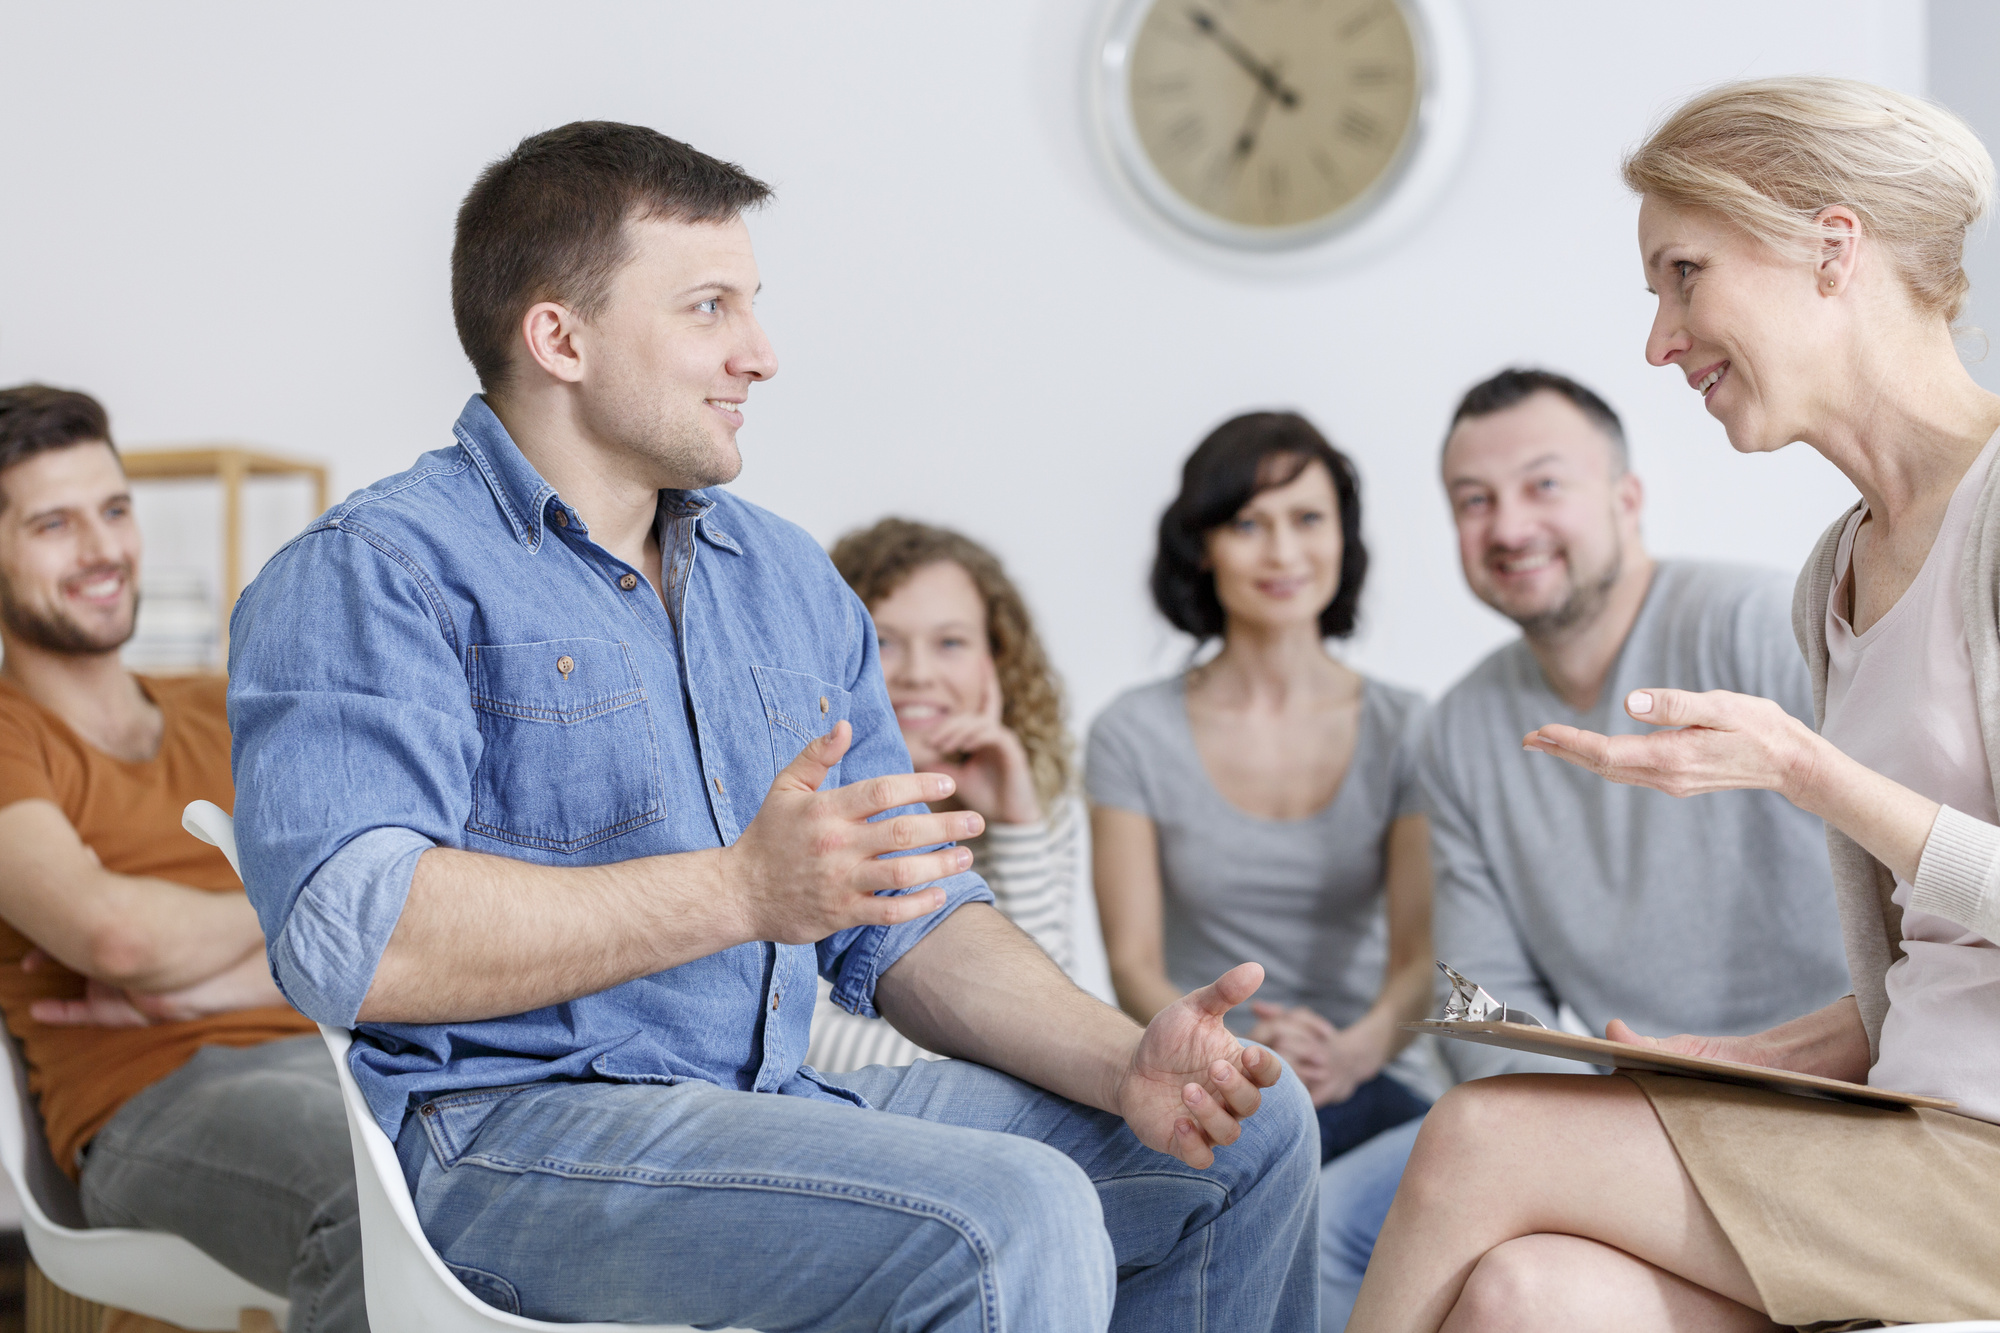 What Can You Expect from Alcohol Intervention Services?